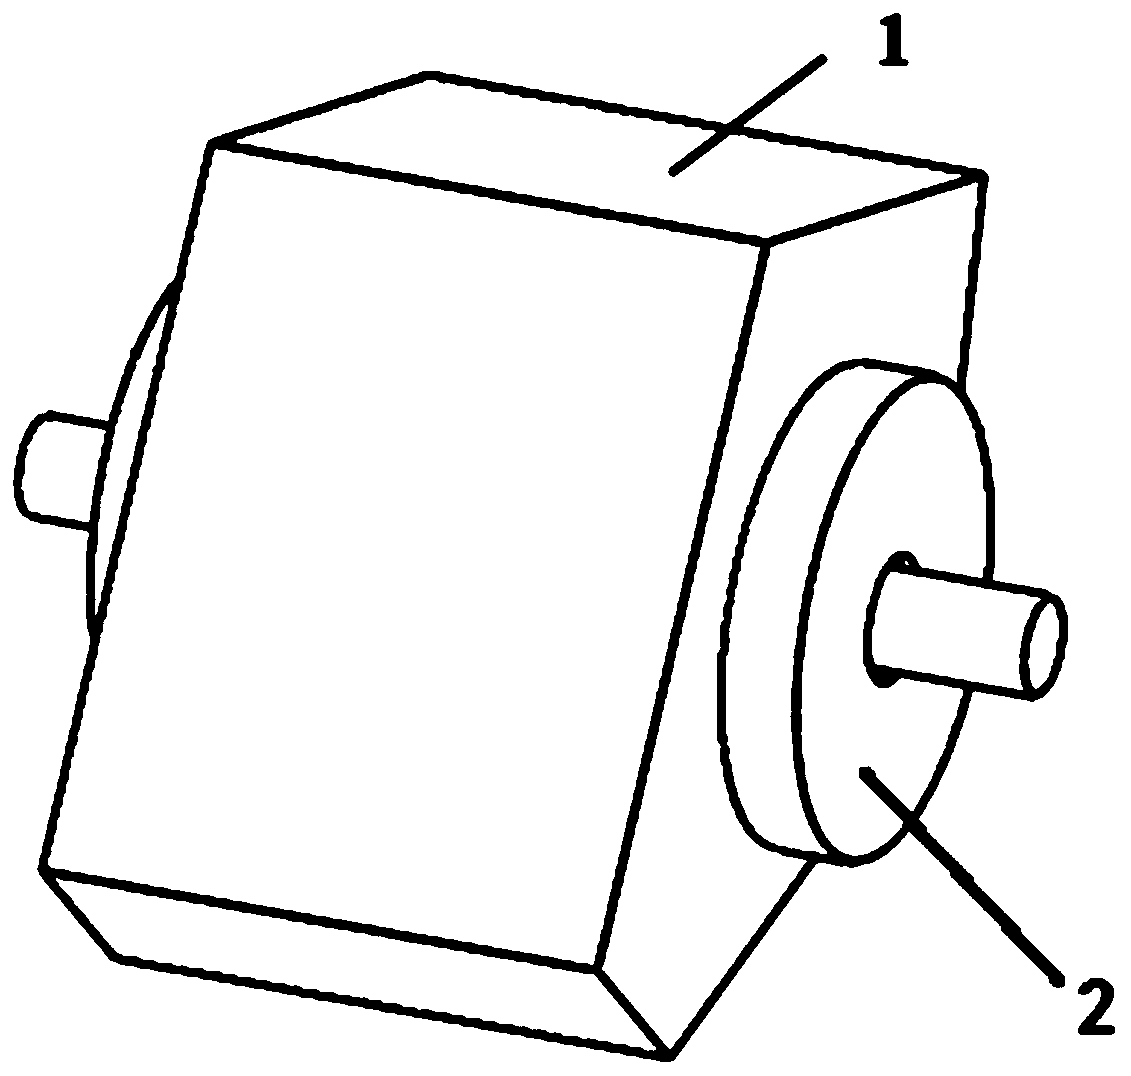 Super-precise turning method for free-form-surface prism